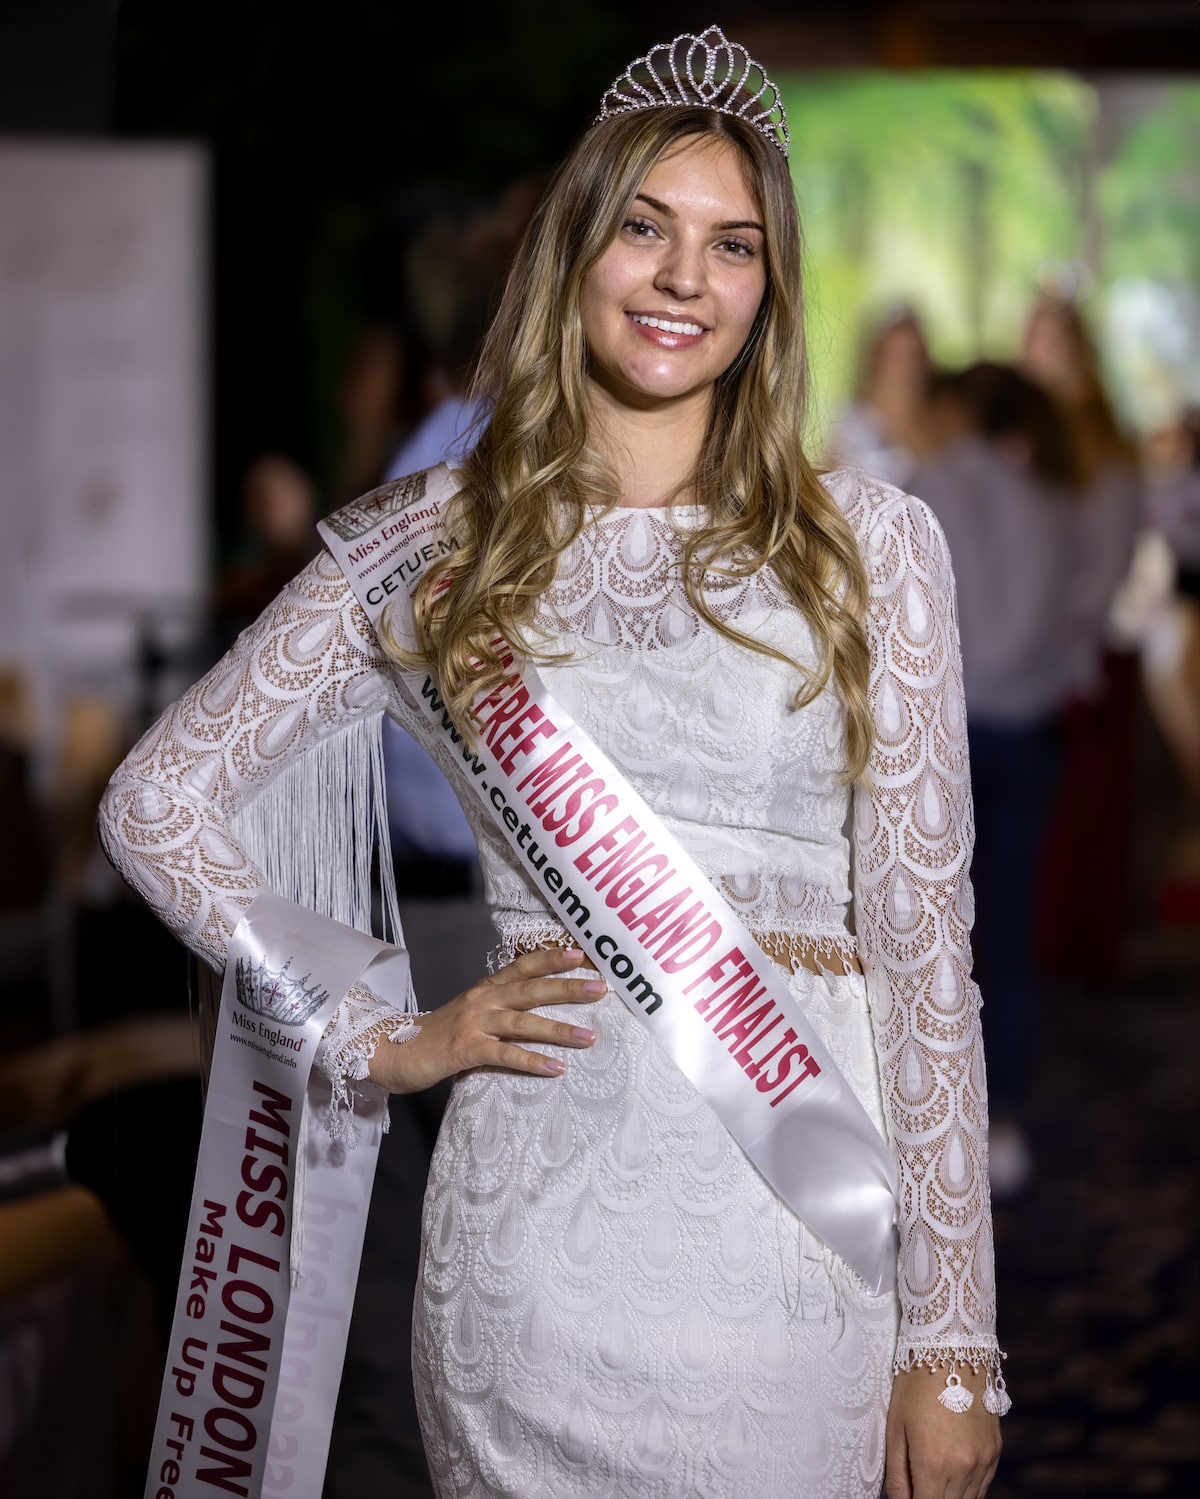 Miss England Makeup Free Beauty Pagent